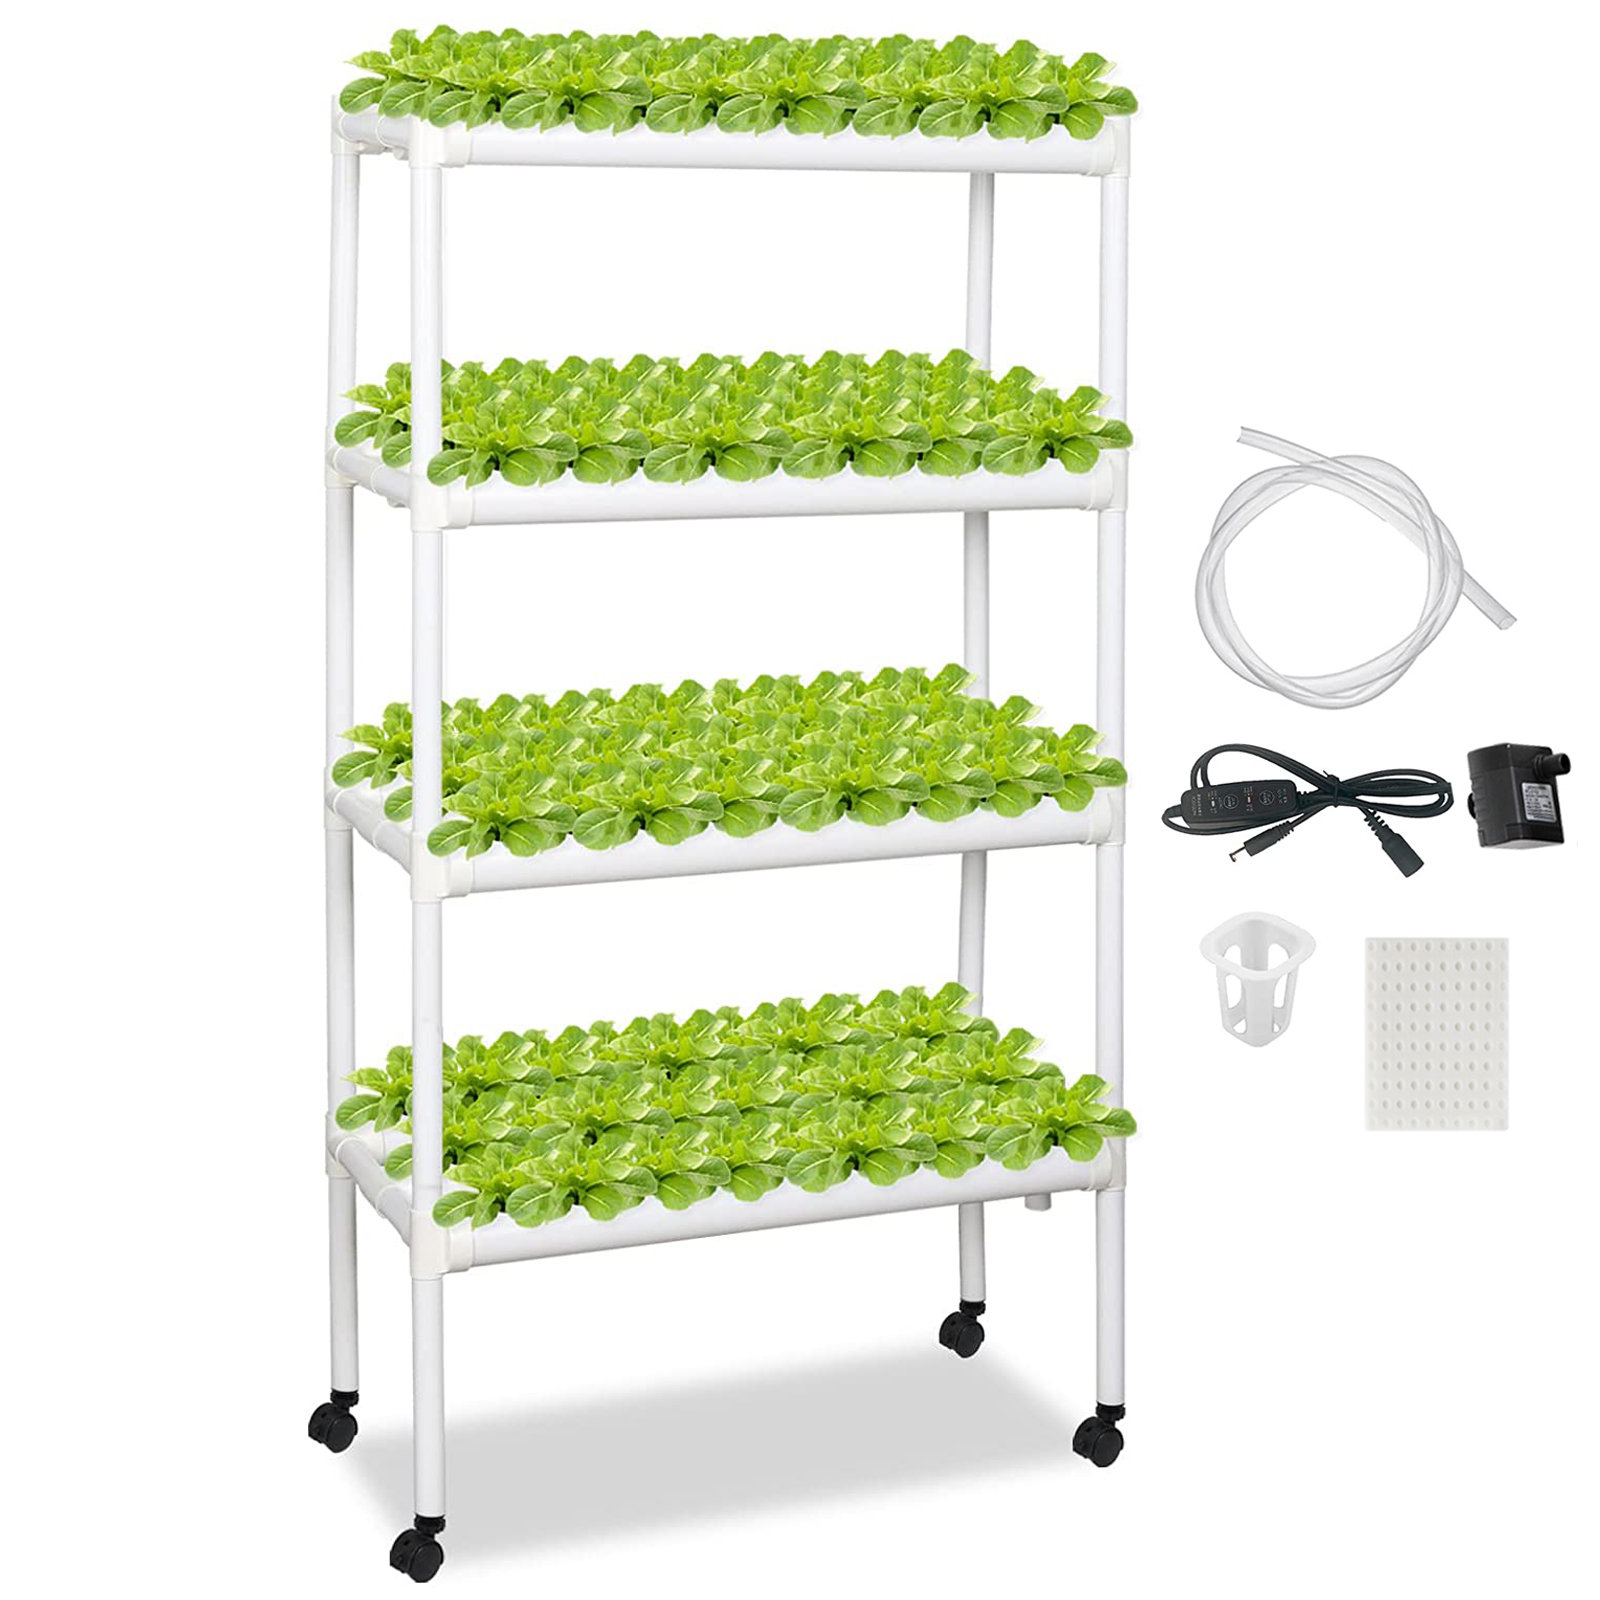 DreamJoy 3 Layers 108 Plant Sites Hydroponic Site Grow Kit 12 Pipes Hydroponic Growing System Water Culture Garden Plant System for Leafy Vegetables Lettuce Herb Celery 